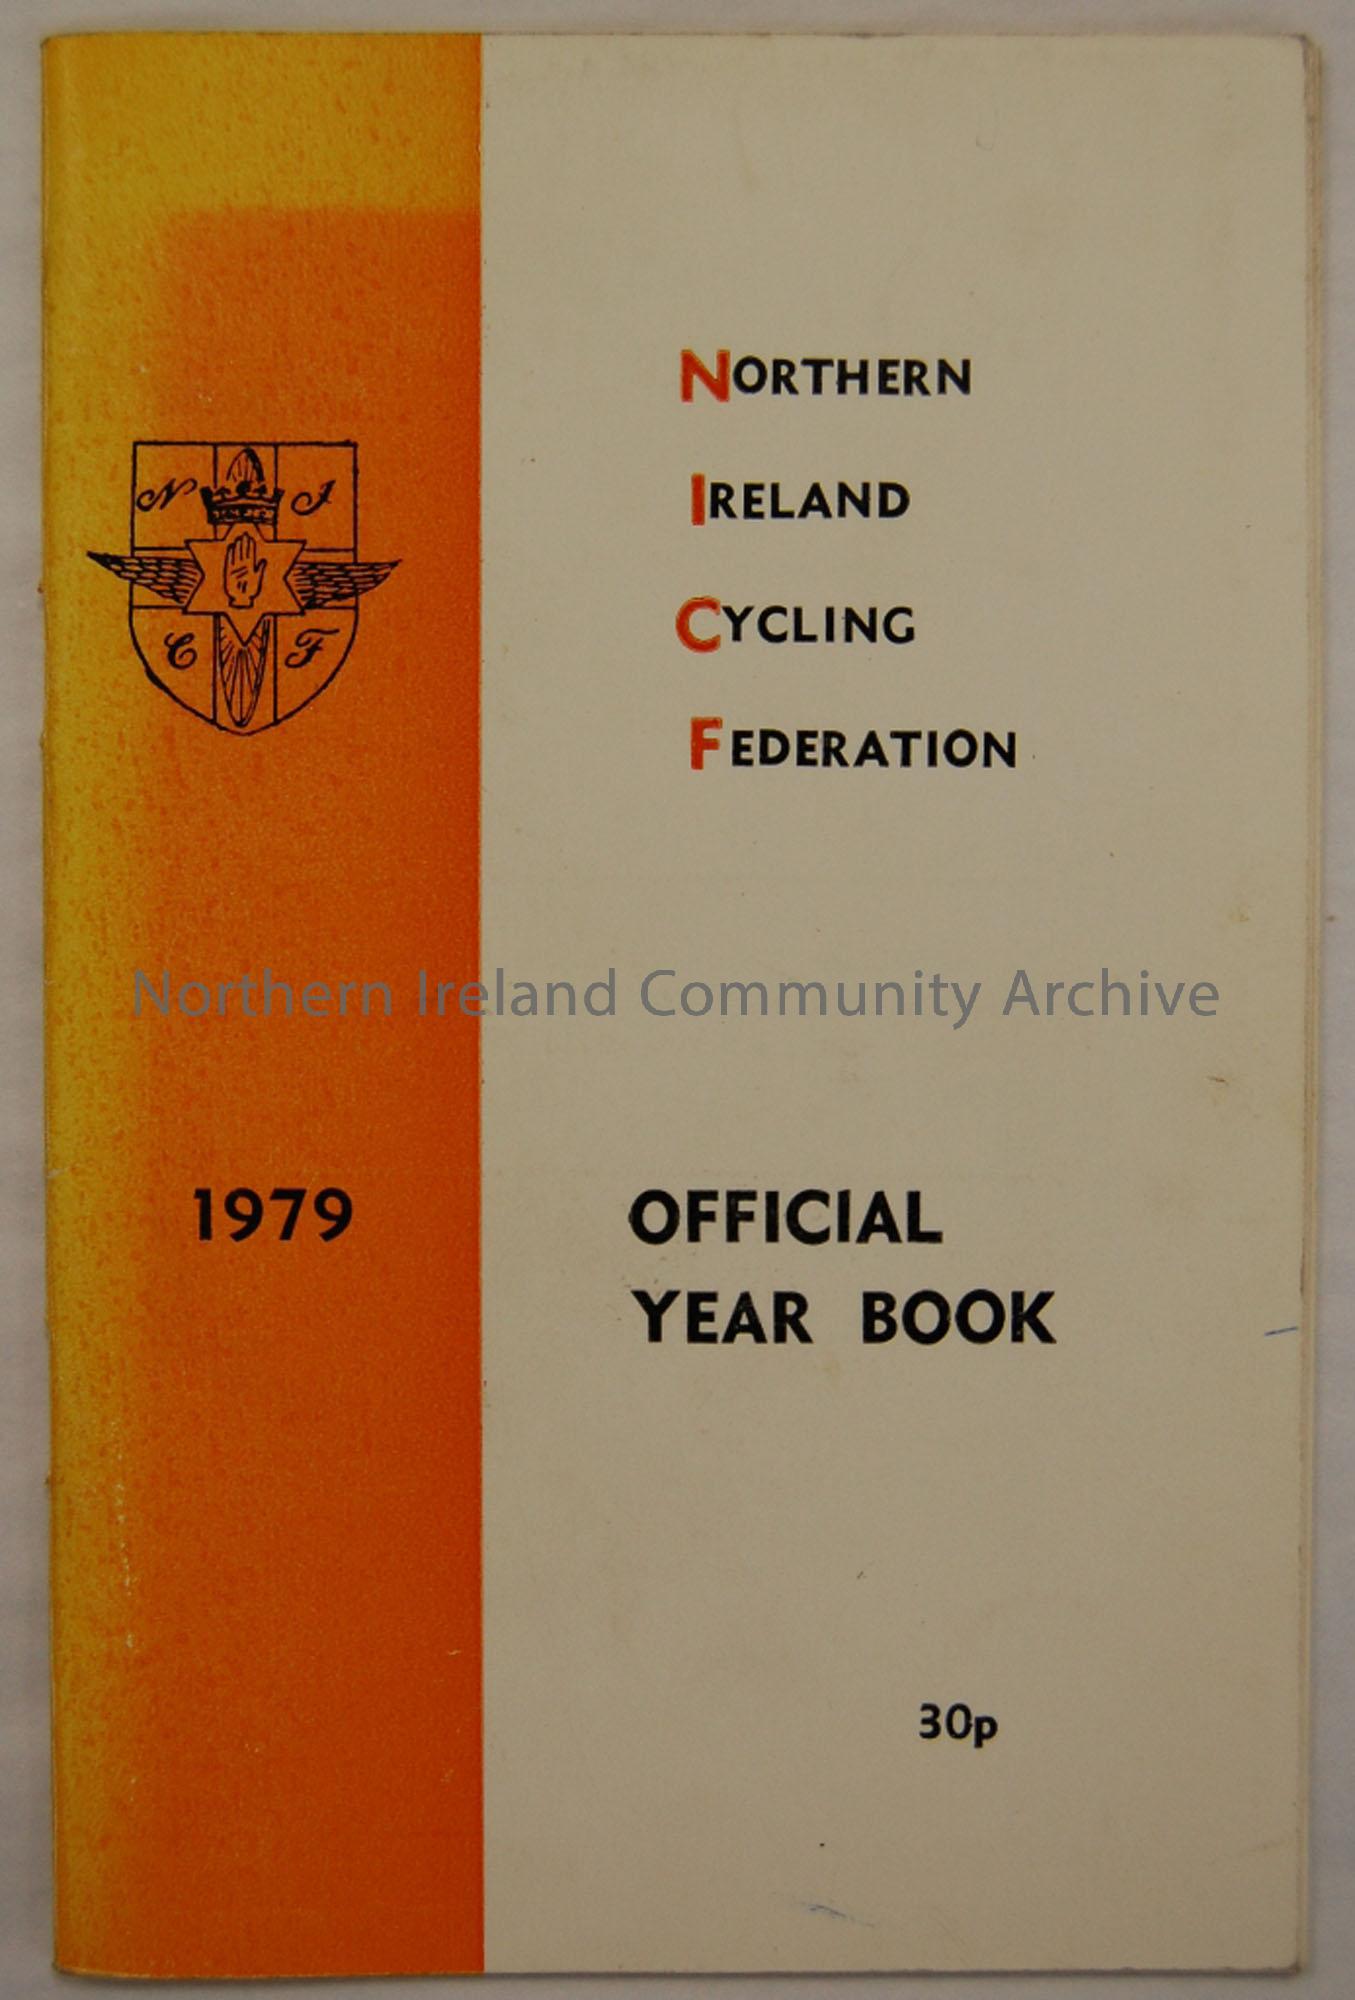 Northern Ireland Cycling Federation Official 1979 Yearbook